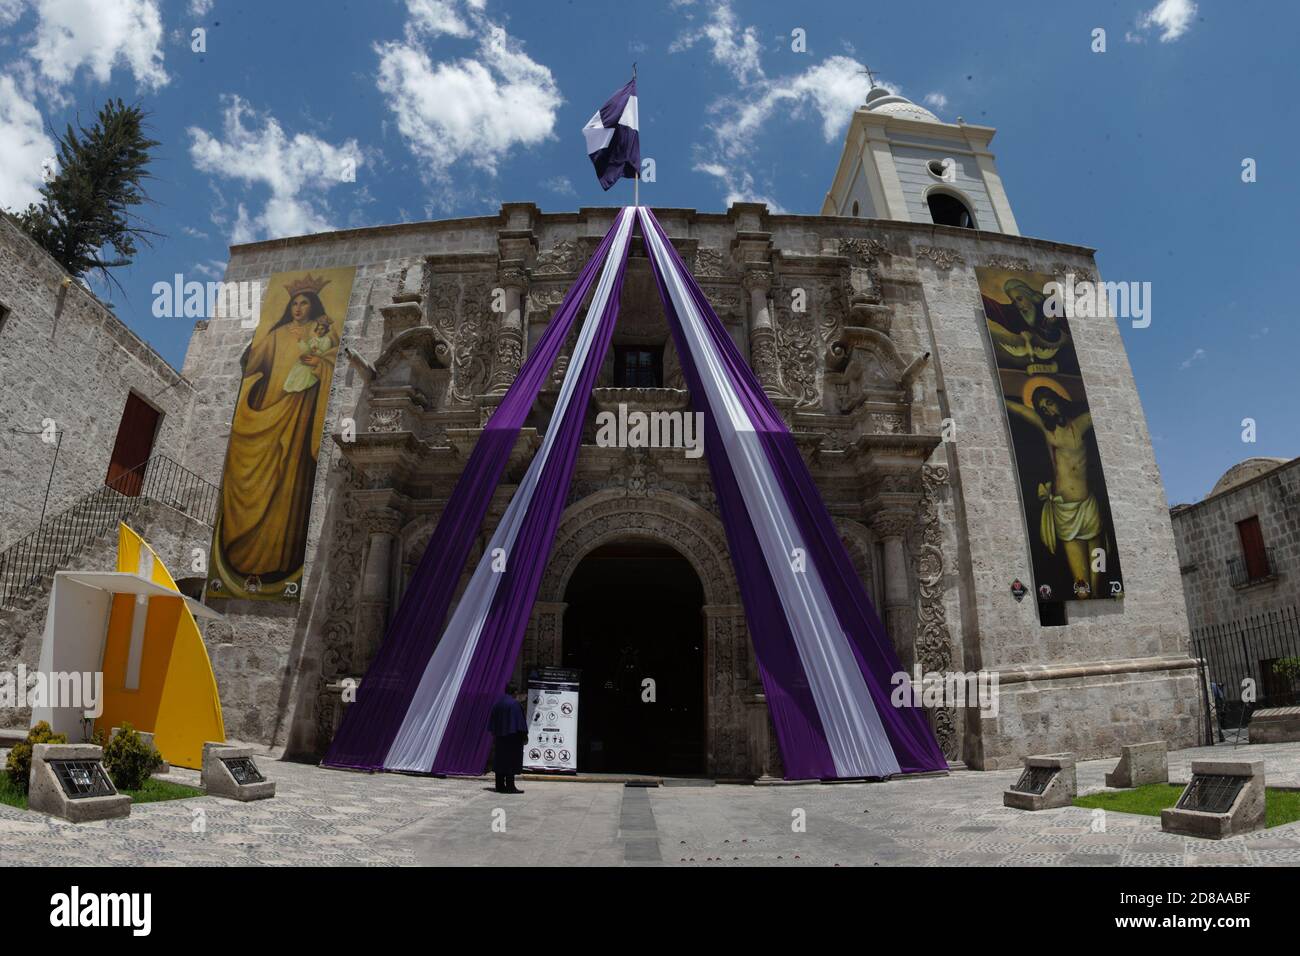 Believers in the 'Lord of Miracles' come to the temple of San Agustín (Arequipa) to pray to the image of the 'Purple Christ'. All health protocols wer Stock Photo